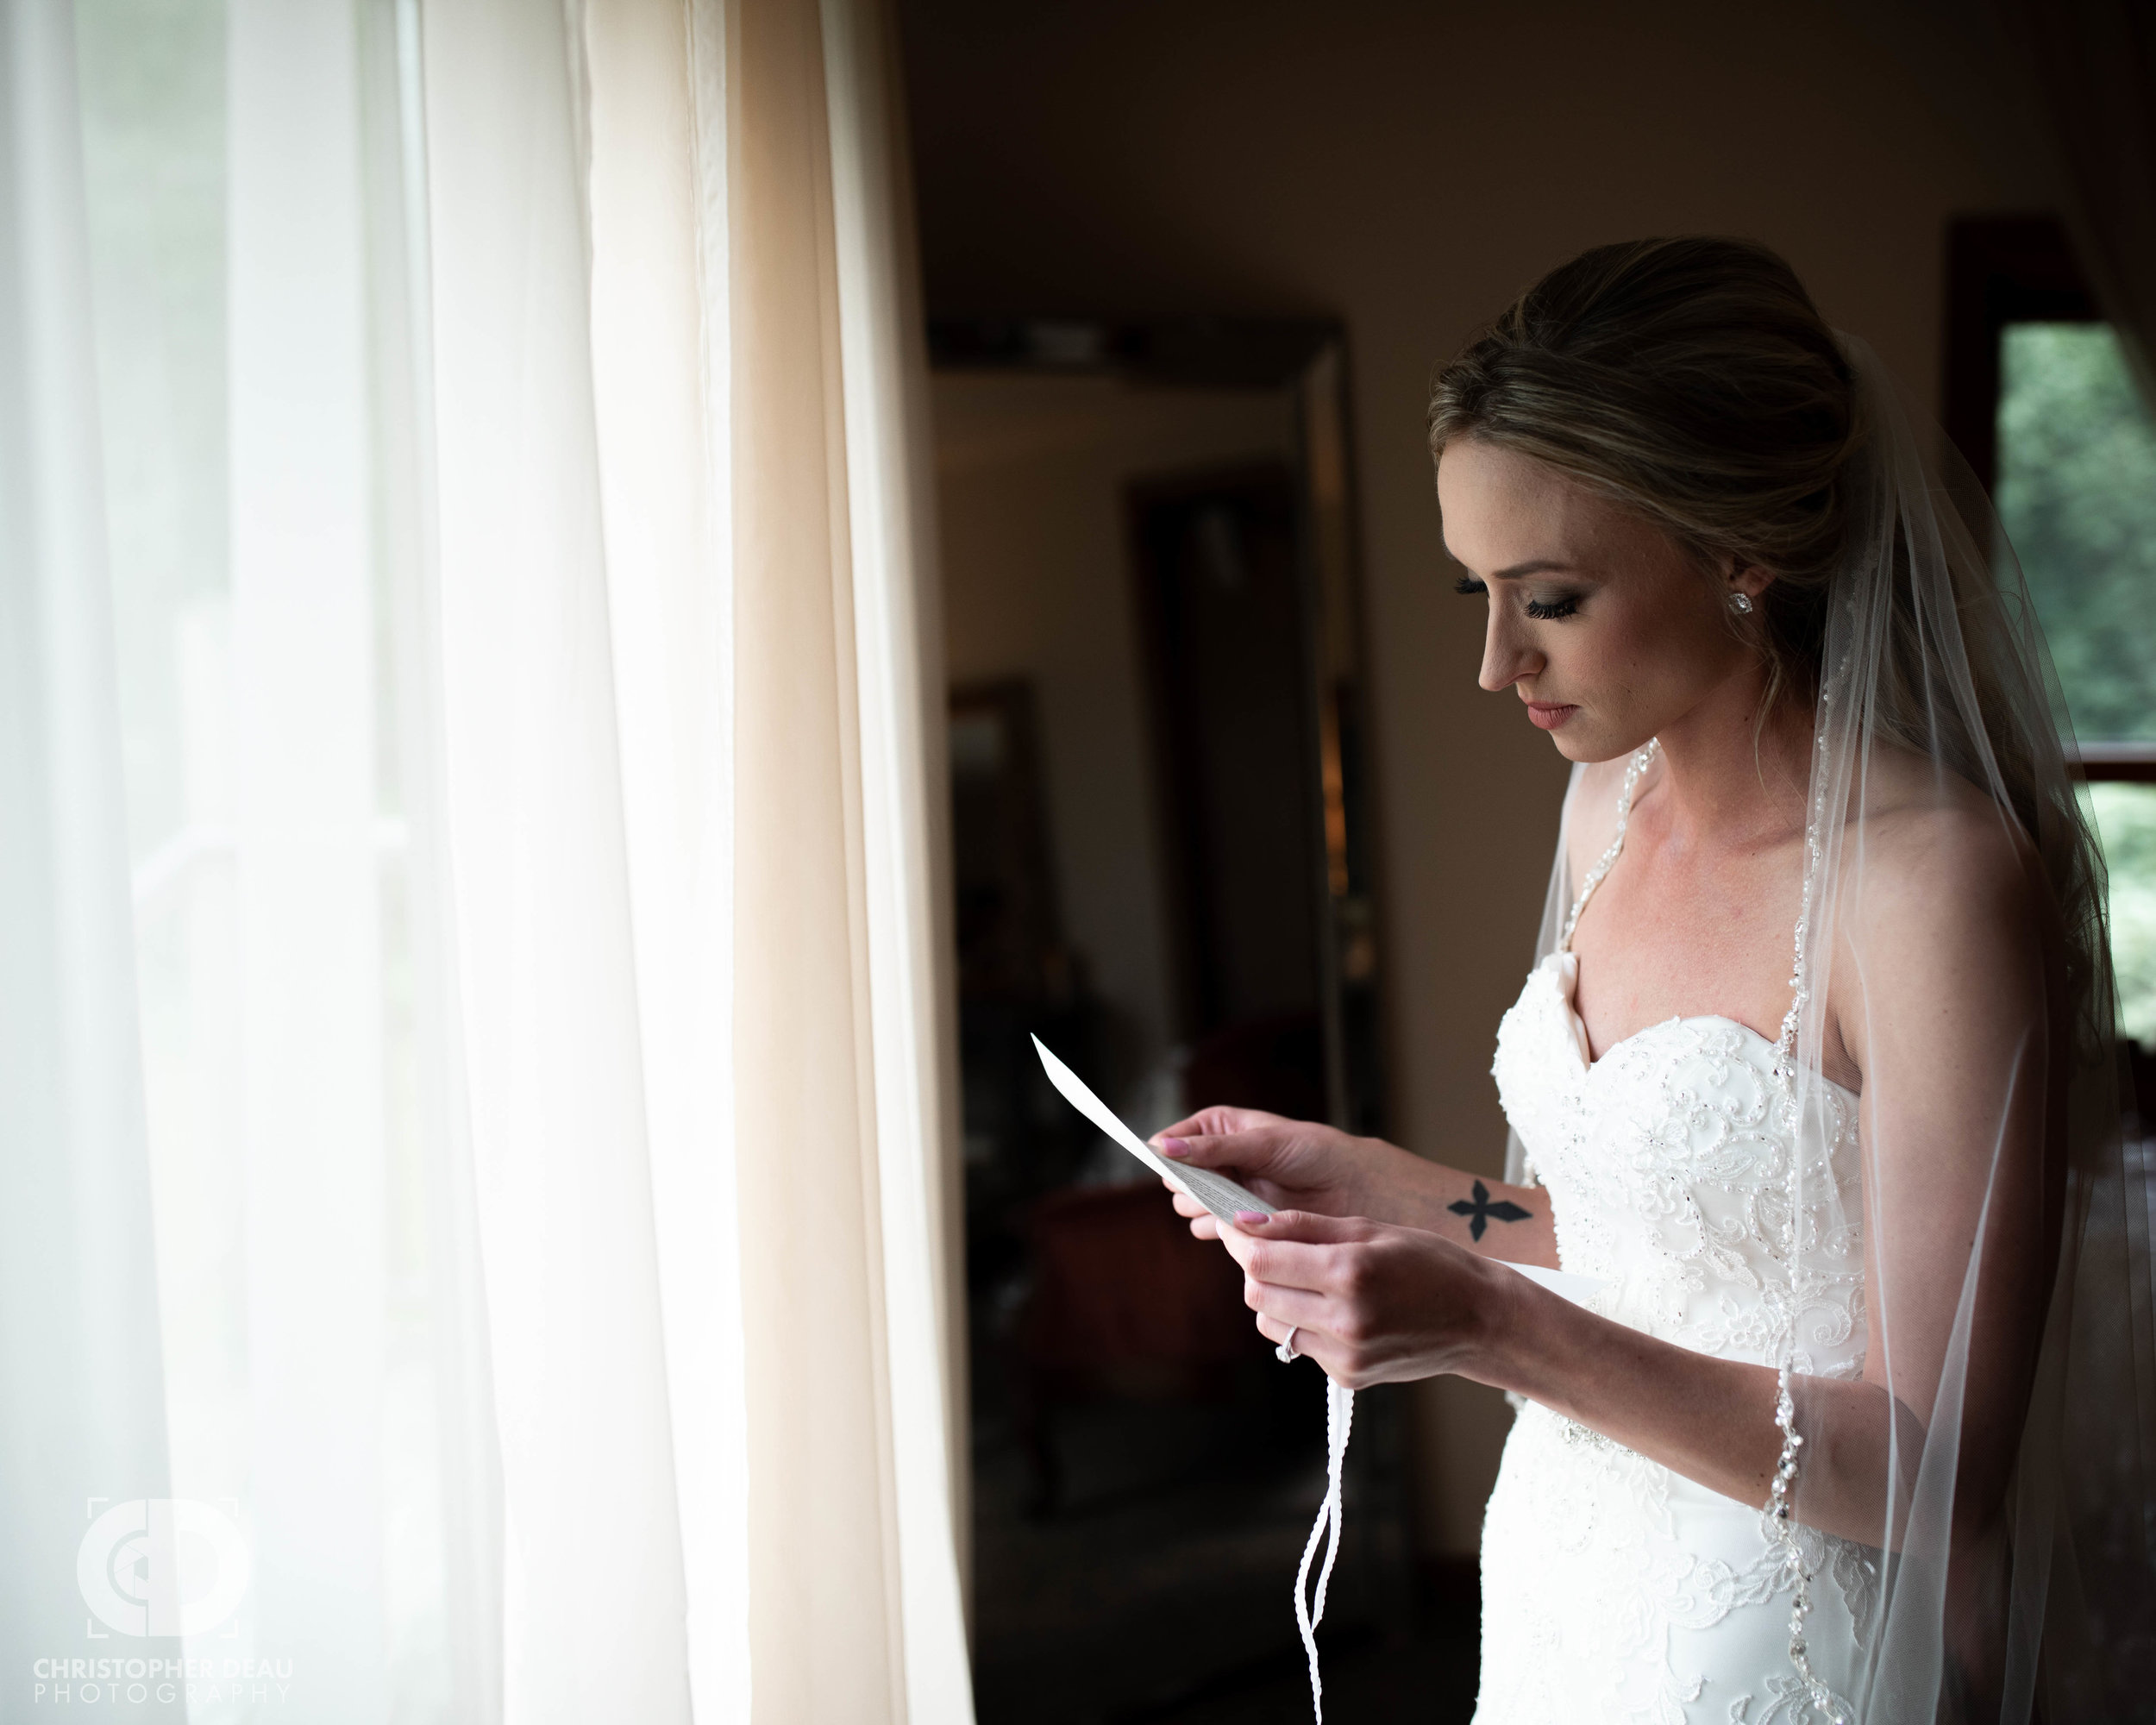  bride reading her letter from the groom 